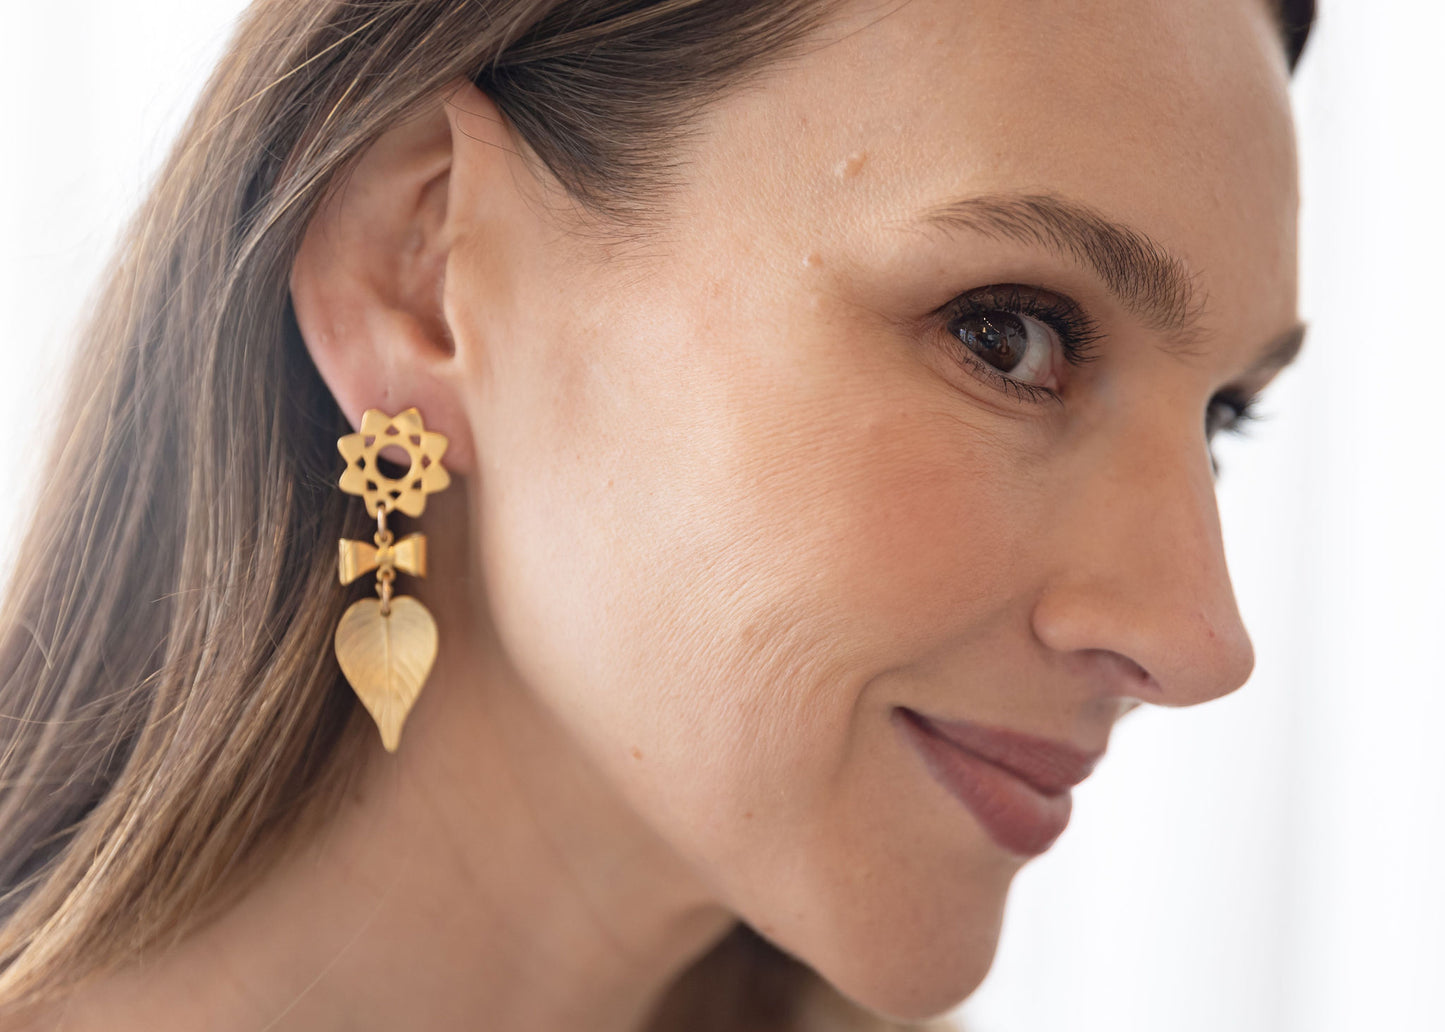 Attract Bow Leaf Earrings | Manifest by Kristin Hayes Jewelry